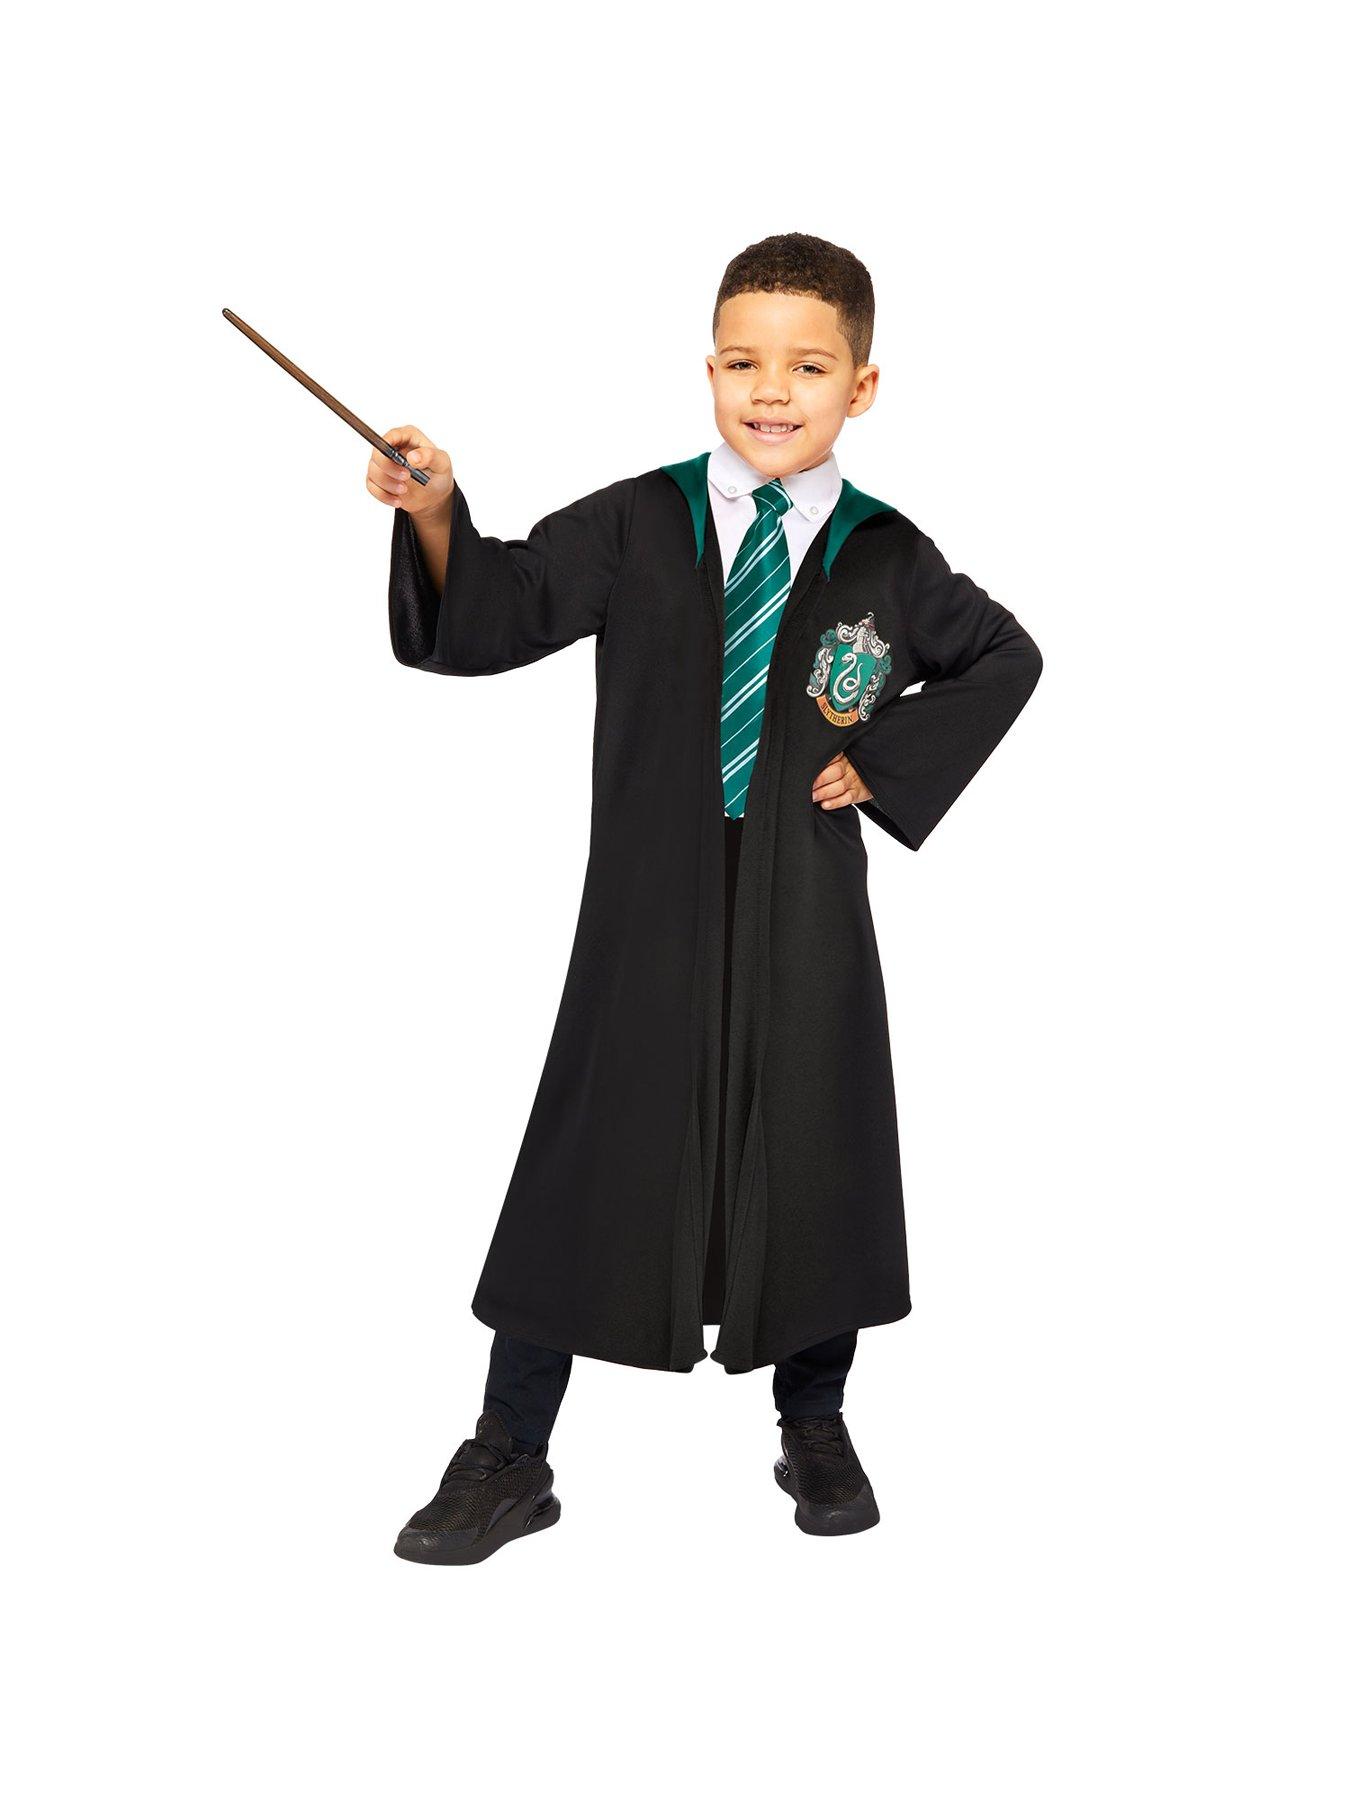 23 Harry Potter Costume Ideas - Character Outfits for Halloween